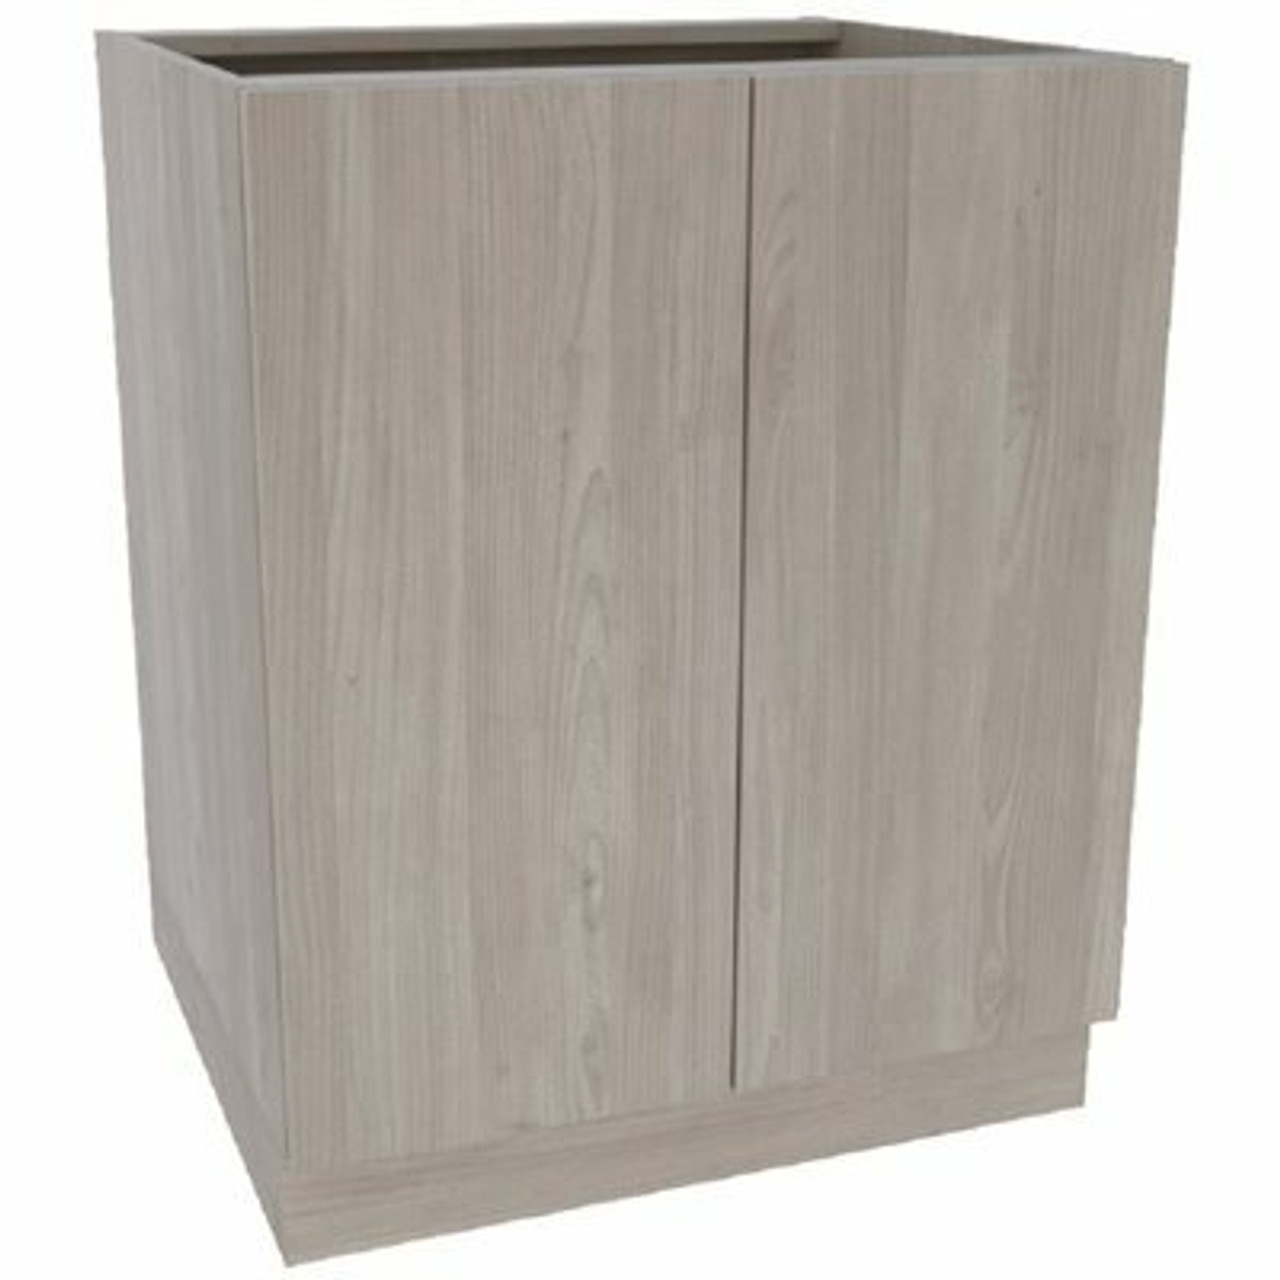 Cambridge Ready To Assemble Threespine 30 In. X 34.5 In. X 21 In. Stock Vanity Sink Base Cabinet In Grey Nordic